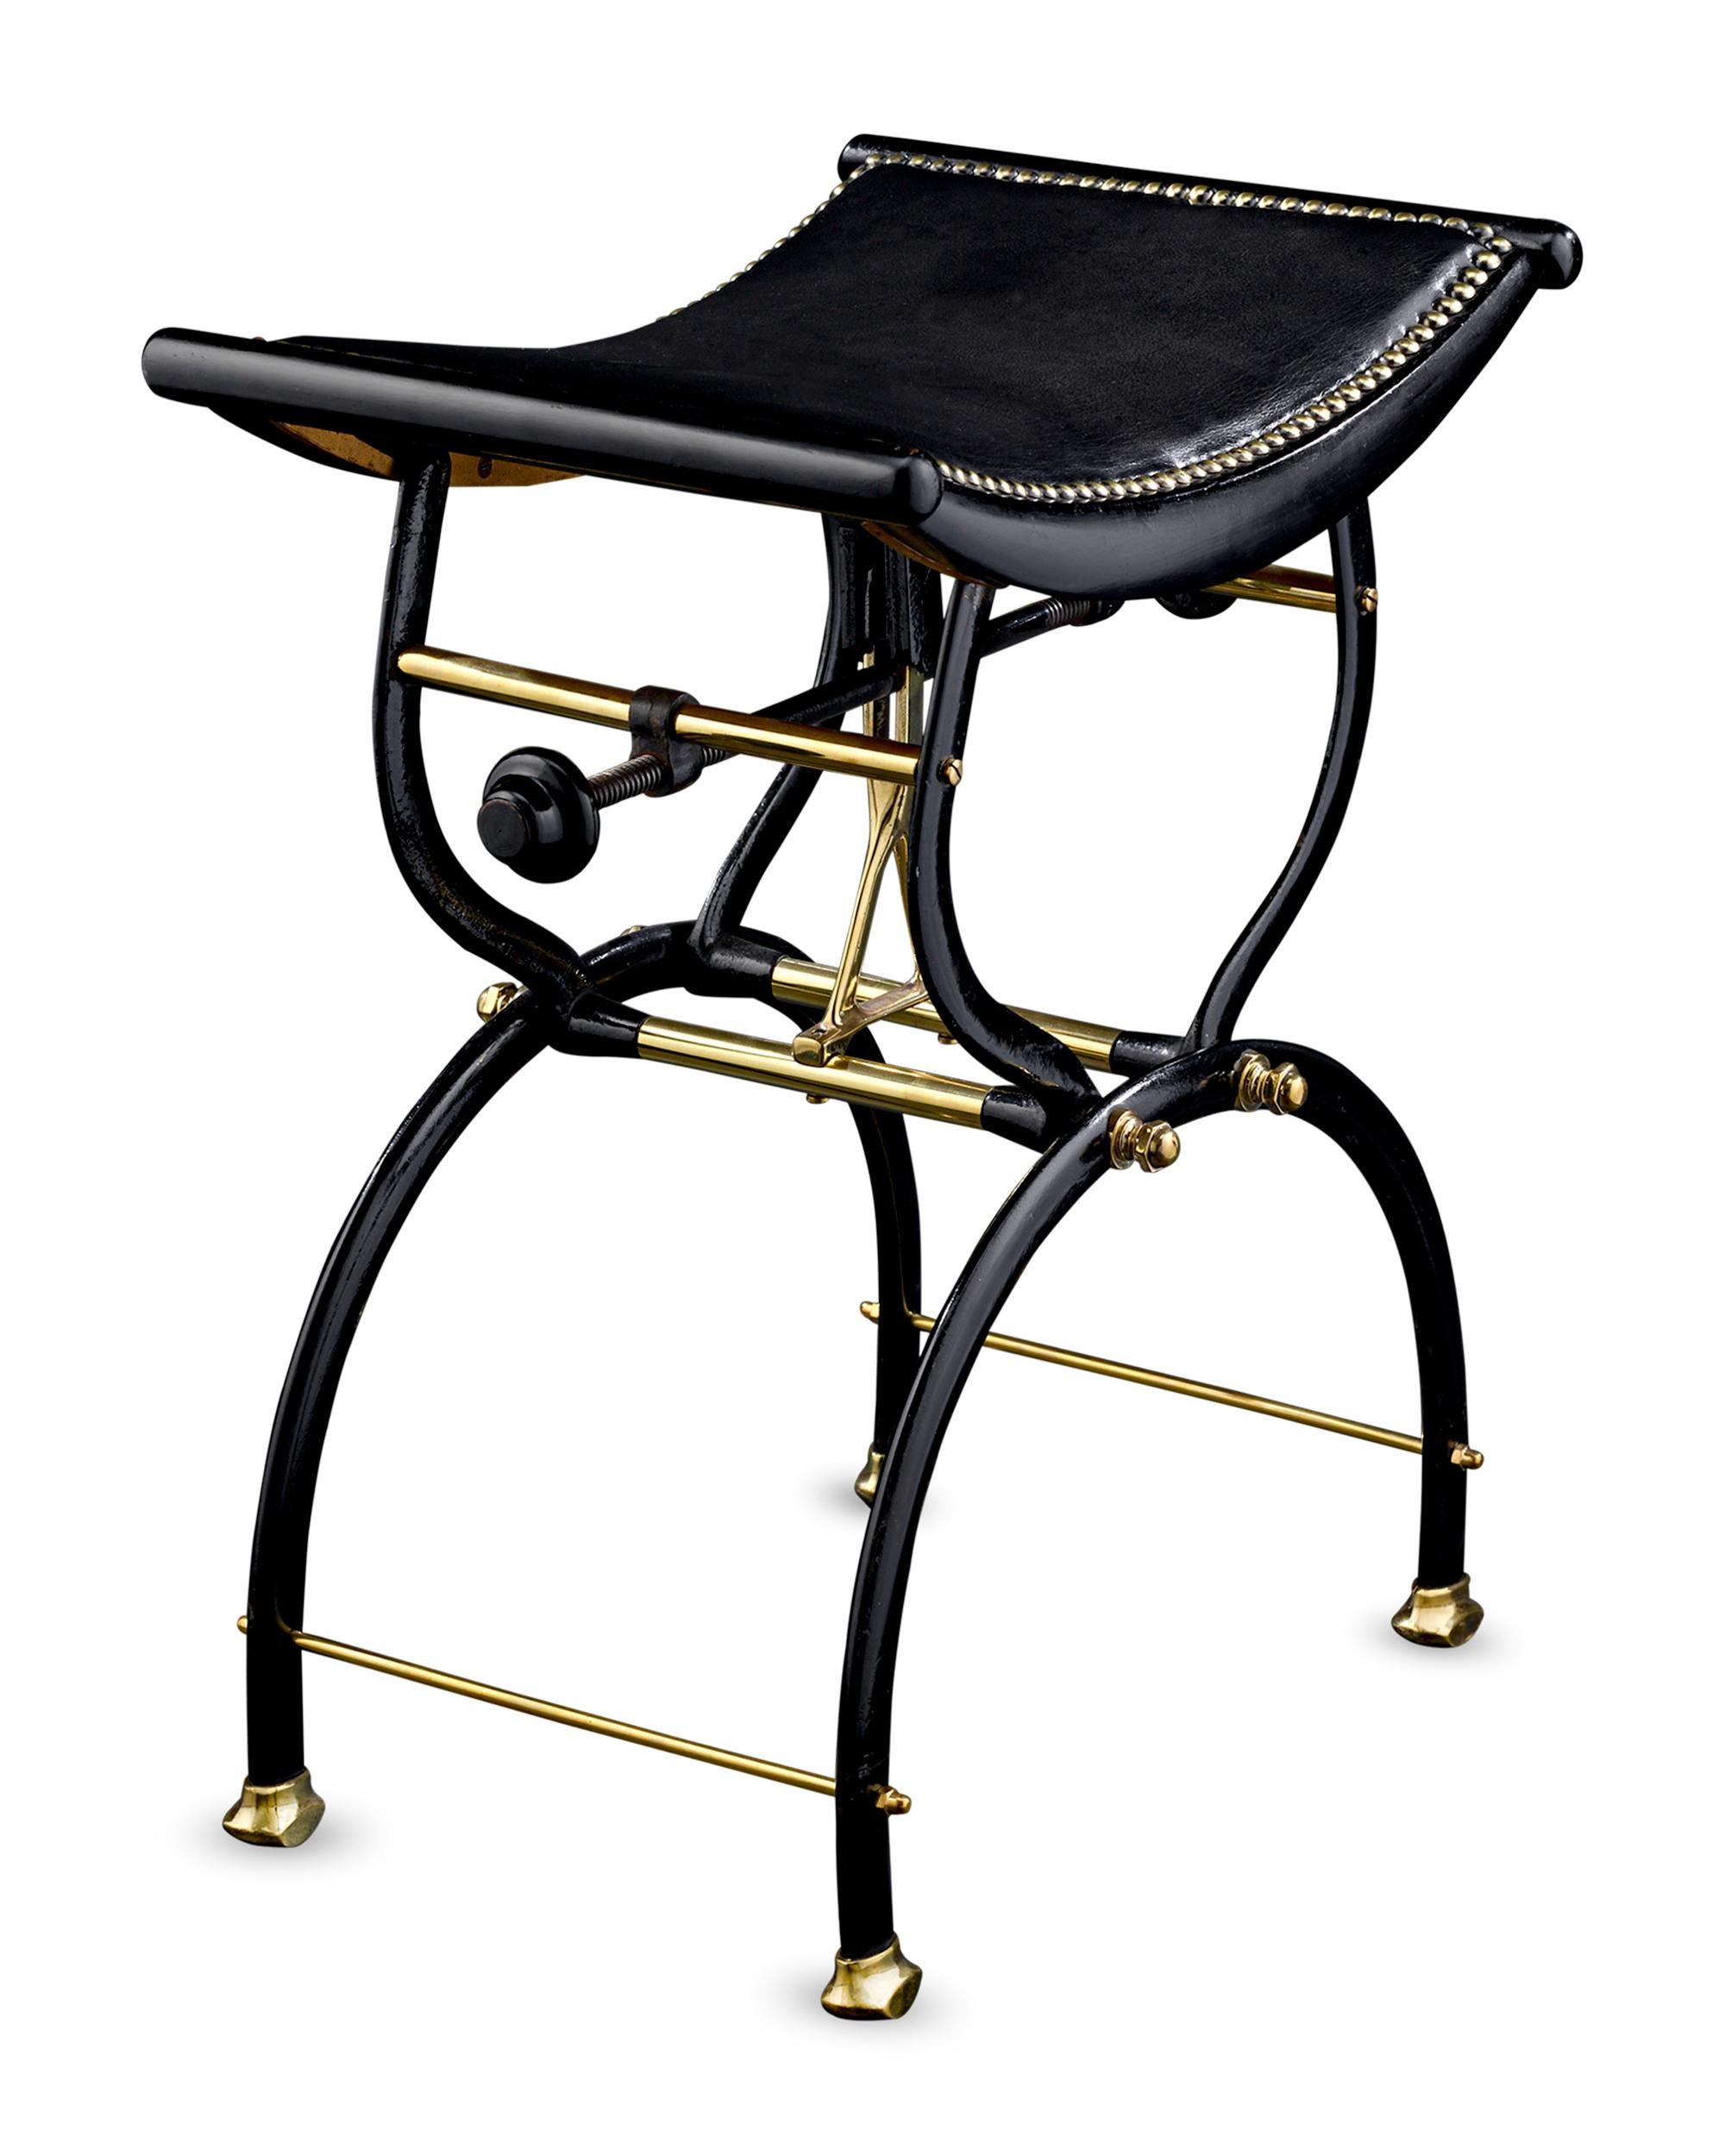 This late Victorian piano stool was created by the English firm of C. H. Hare & Son, which patented the base's unique X-frame design and crescent-shaped seat. Constructed of ebonized wood, cast iron and brass with an adjustable rise and fall